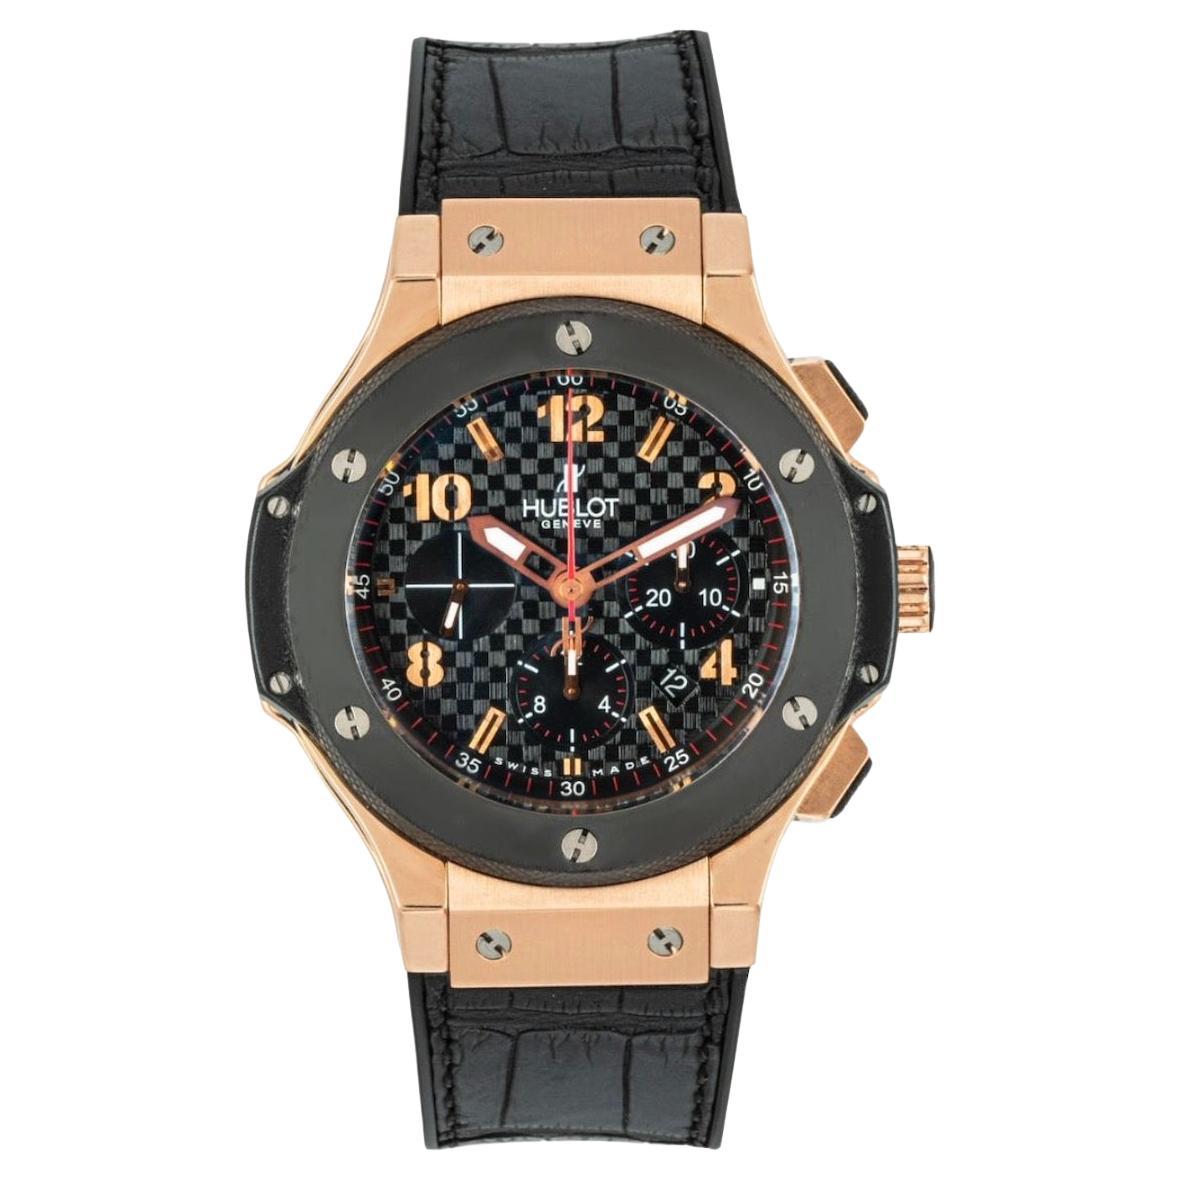 An 18k rose gold Big Bang wristwatch by Hublot. Featuring a black carbon effect dial with applied arabic numbers, chronograph counters, and a fixed black ceramic bezel set with the six iconic Hublot titanium H screws.

Equipped with a Hublot black